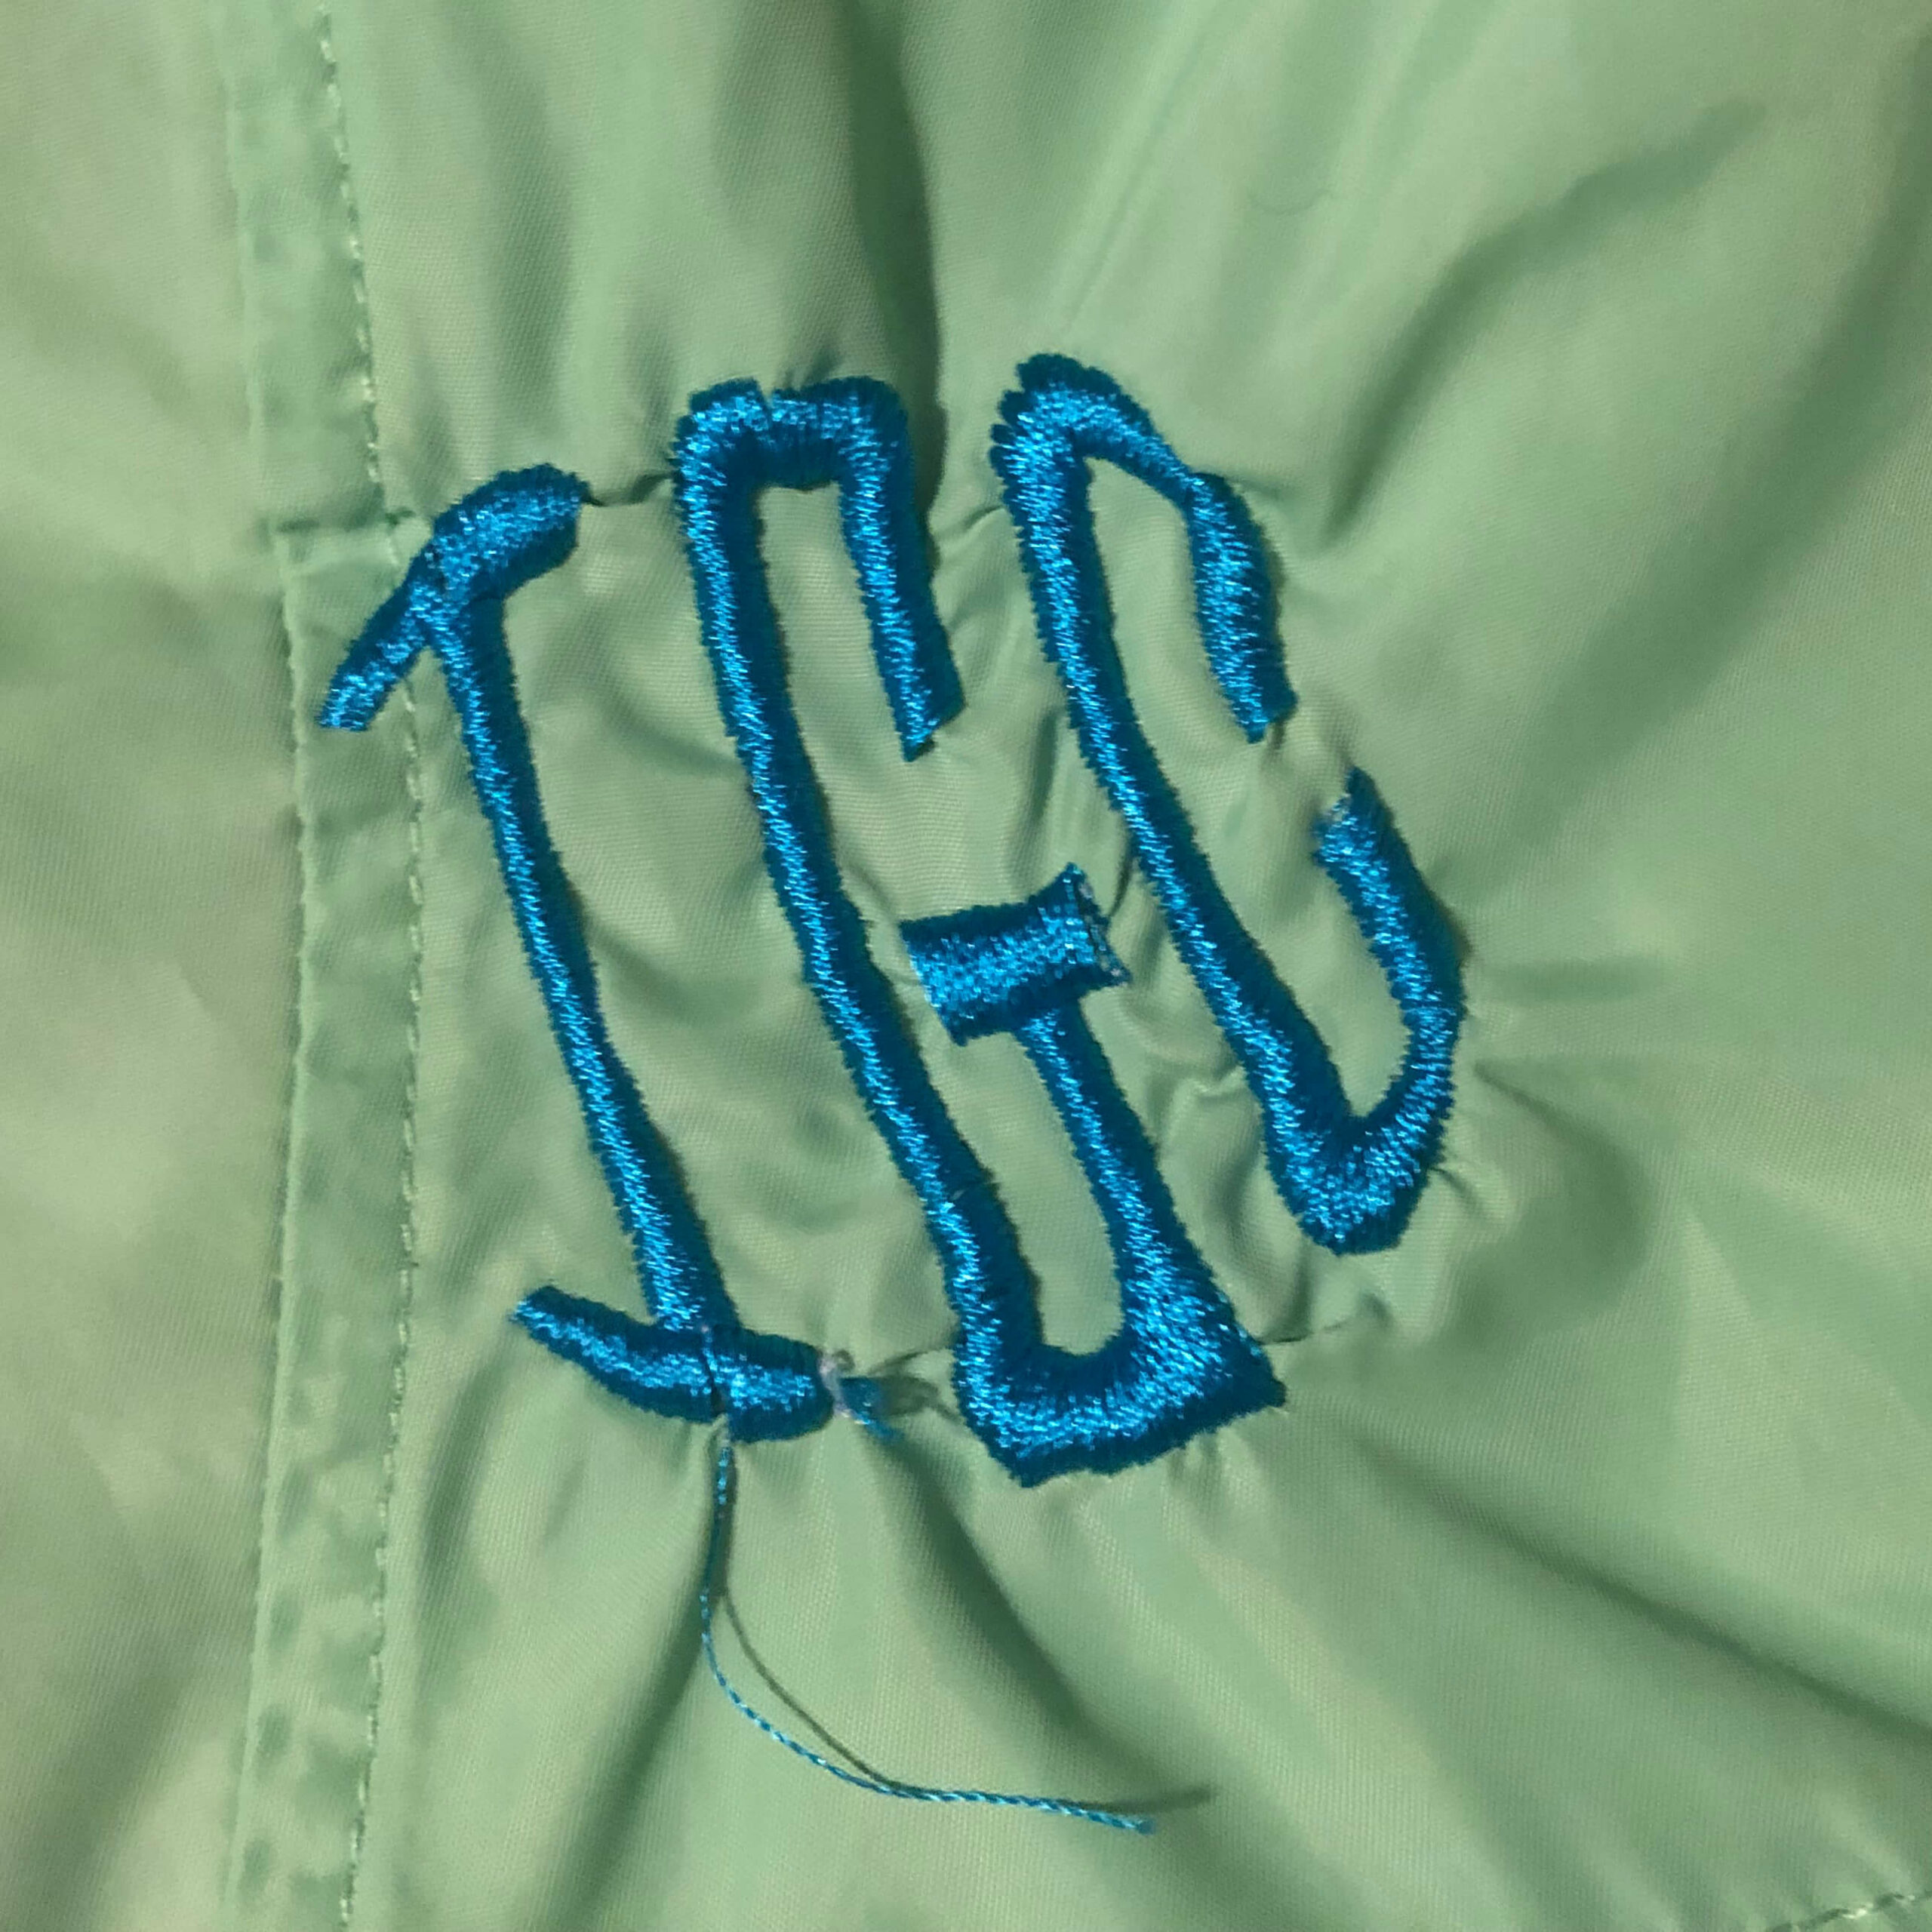 How to Prevent and Stop Puckering in Your Machine Embroidery